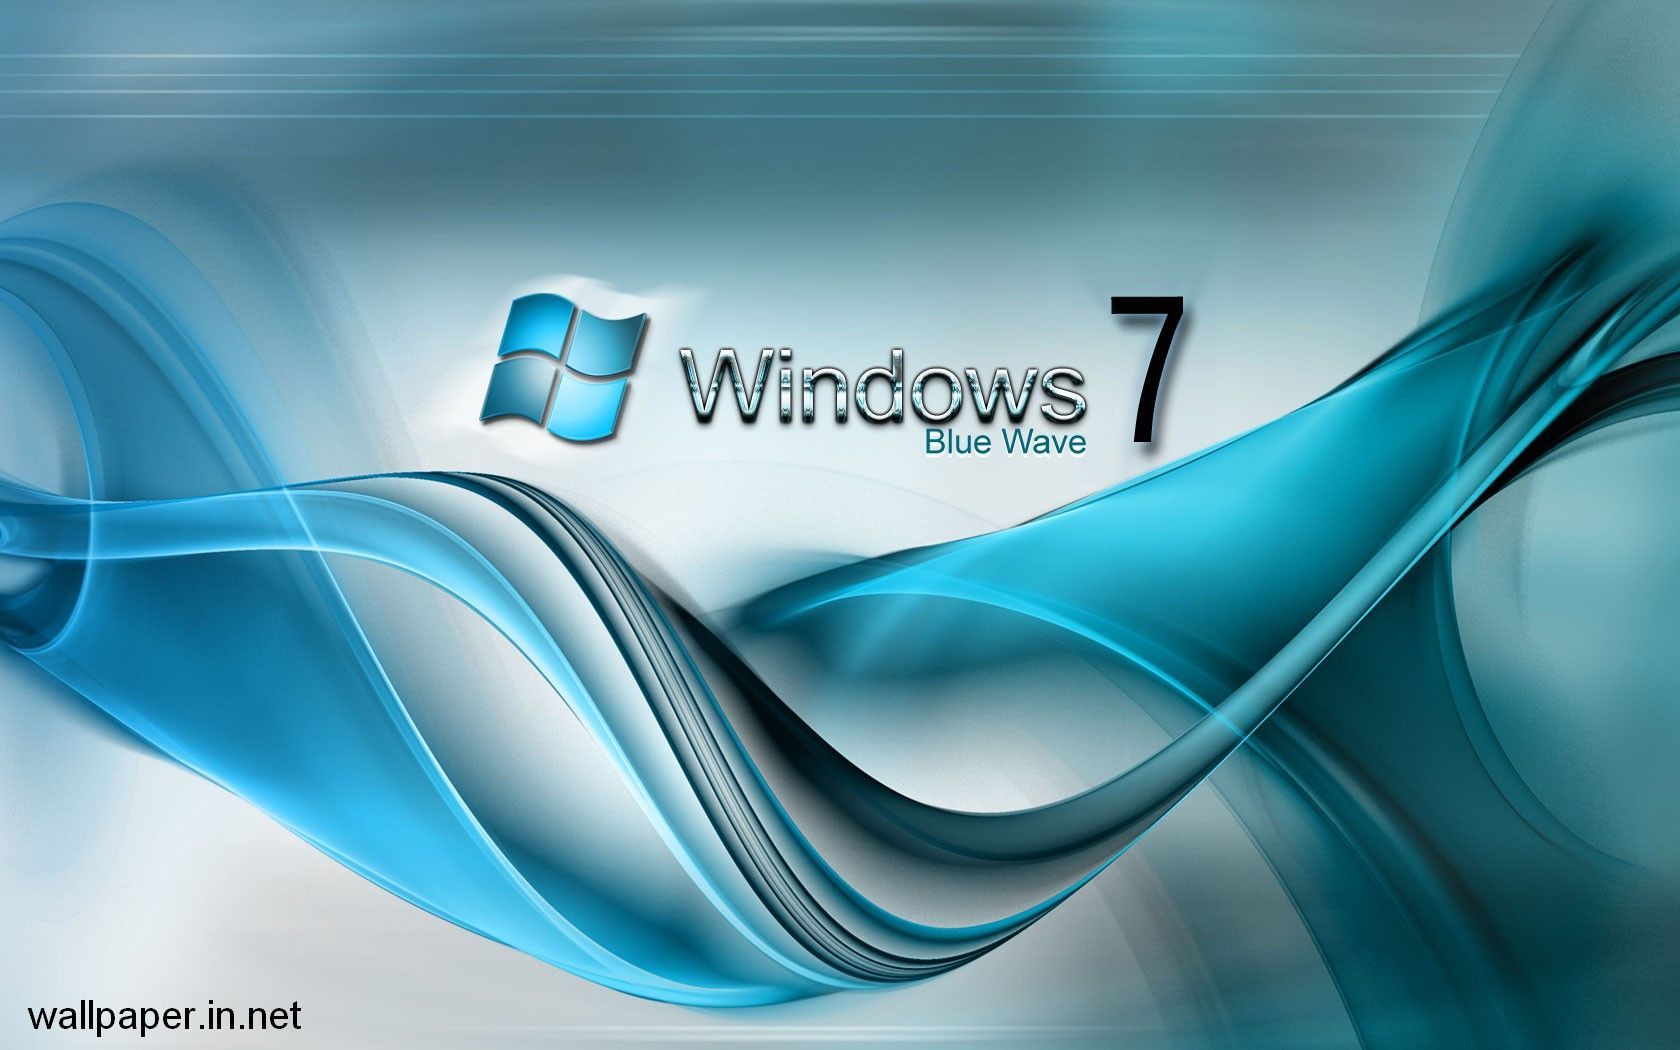 HD wallpapers for windows 7 ultimate free download -